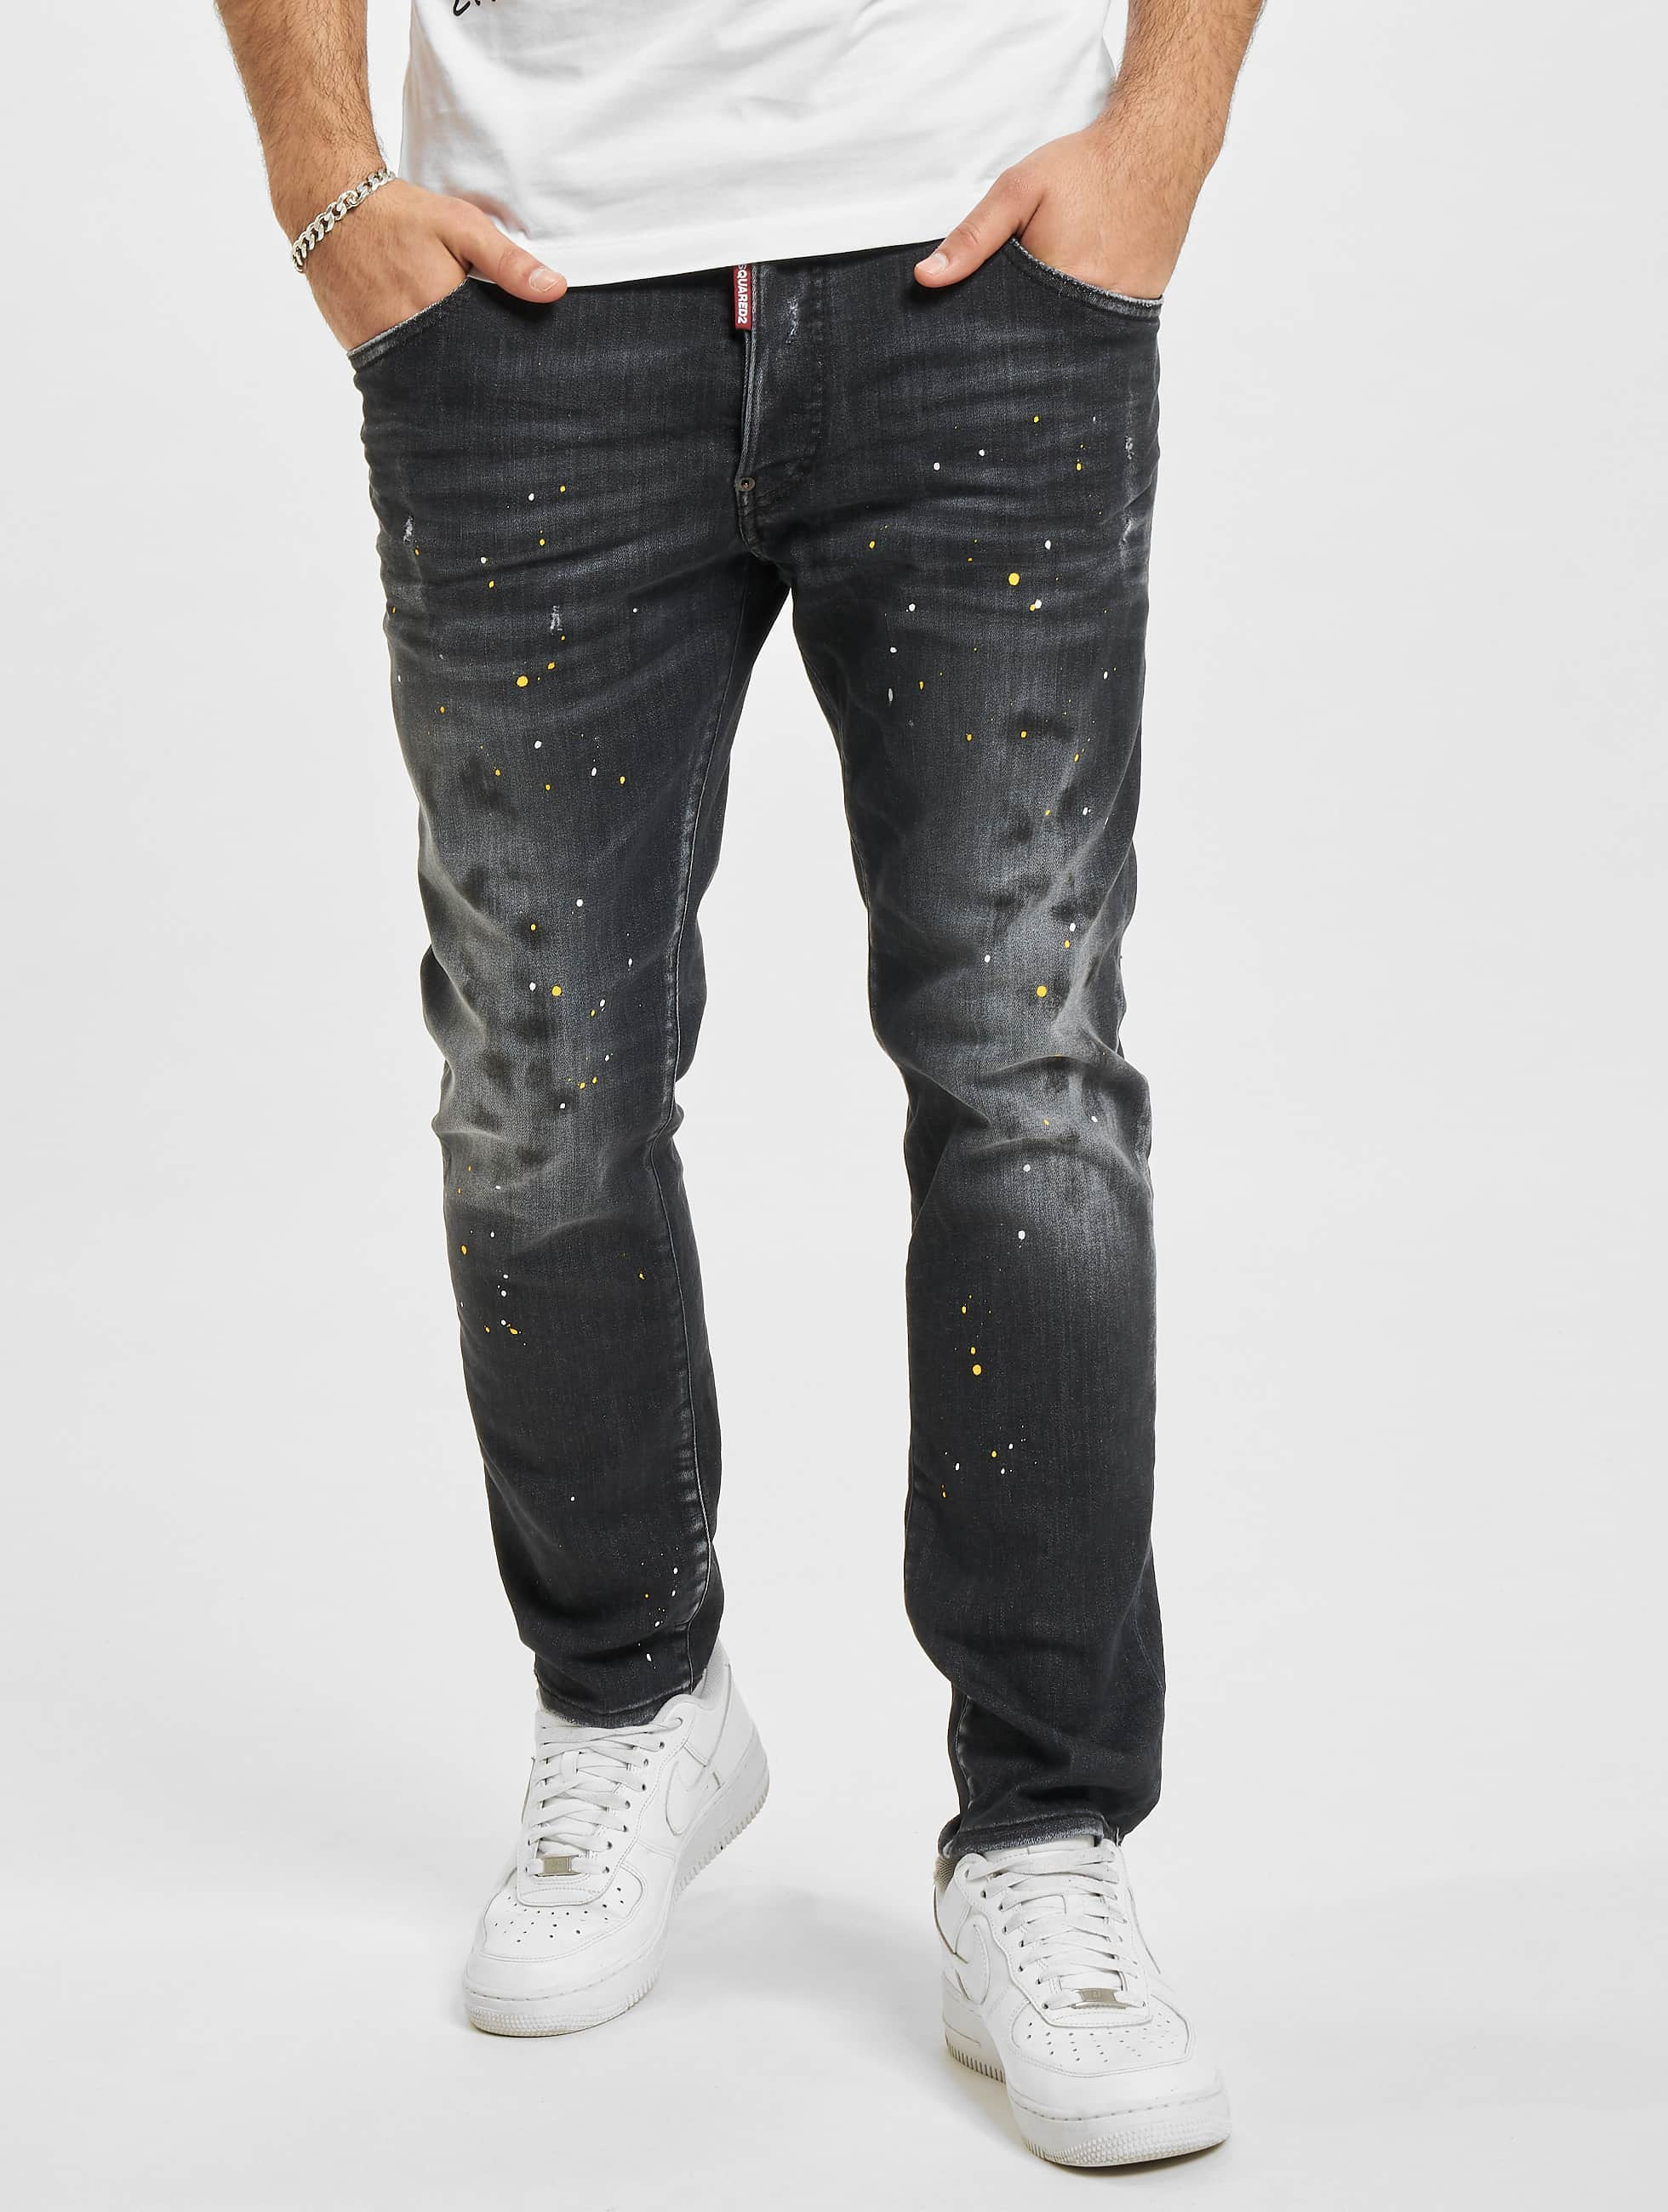 Industrieel Spanje lokaal Dsquared Jeans Zwart Hotsell, SAVE 53% - icarus.photos